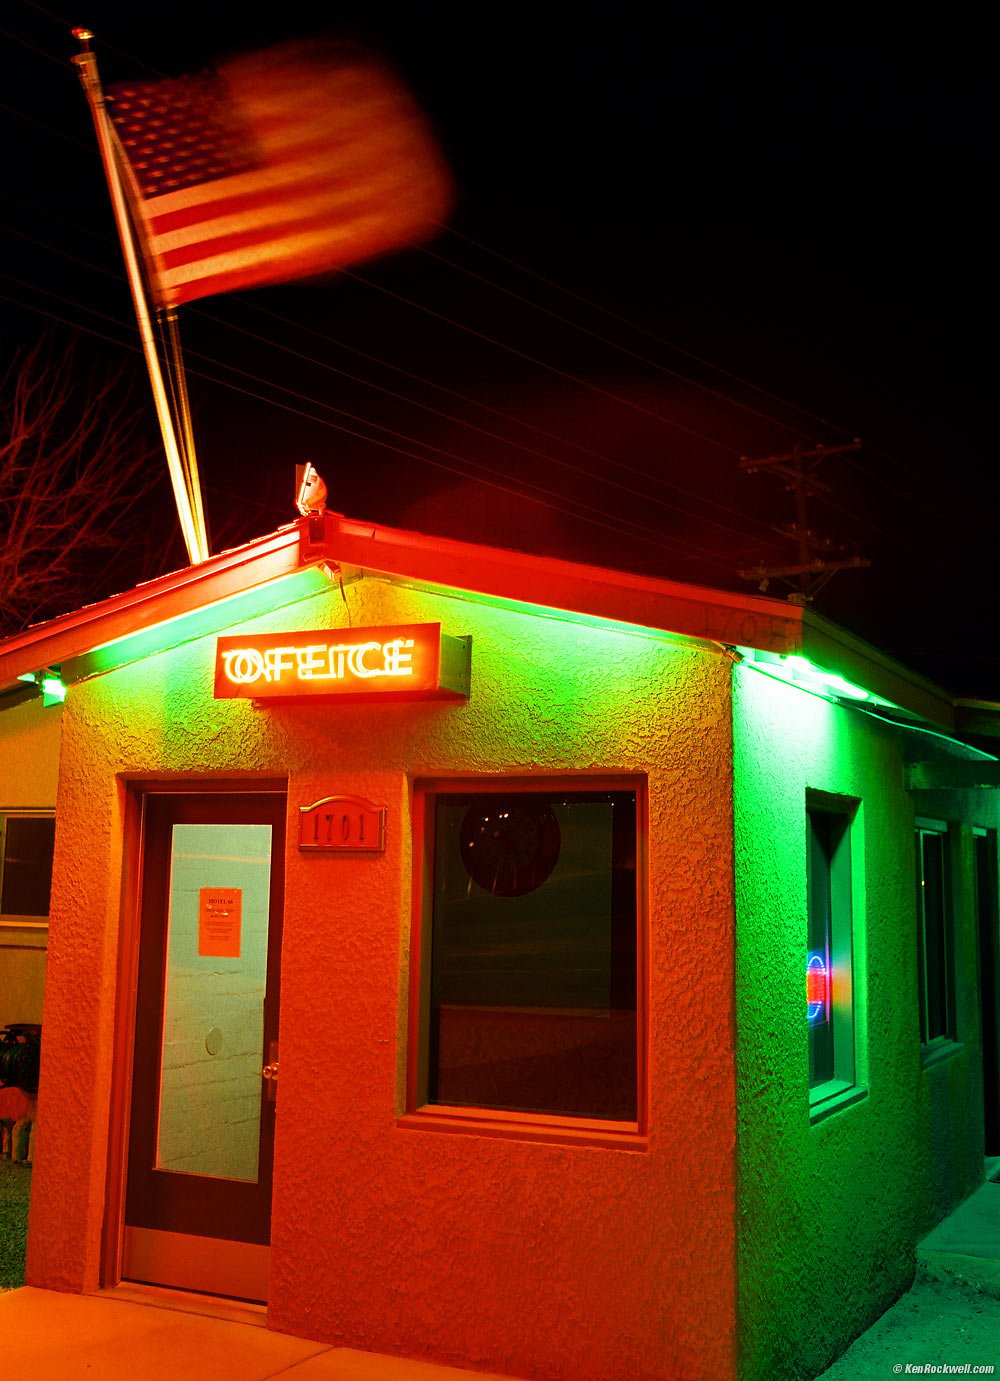 Neon Motel at night in Barstow